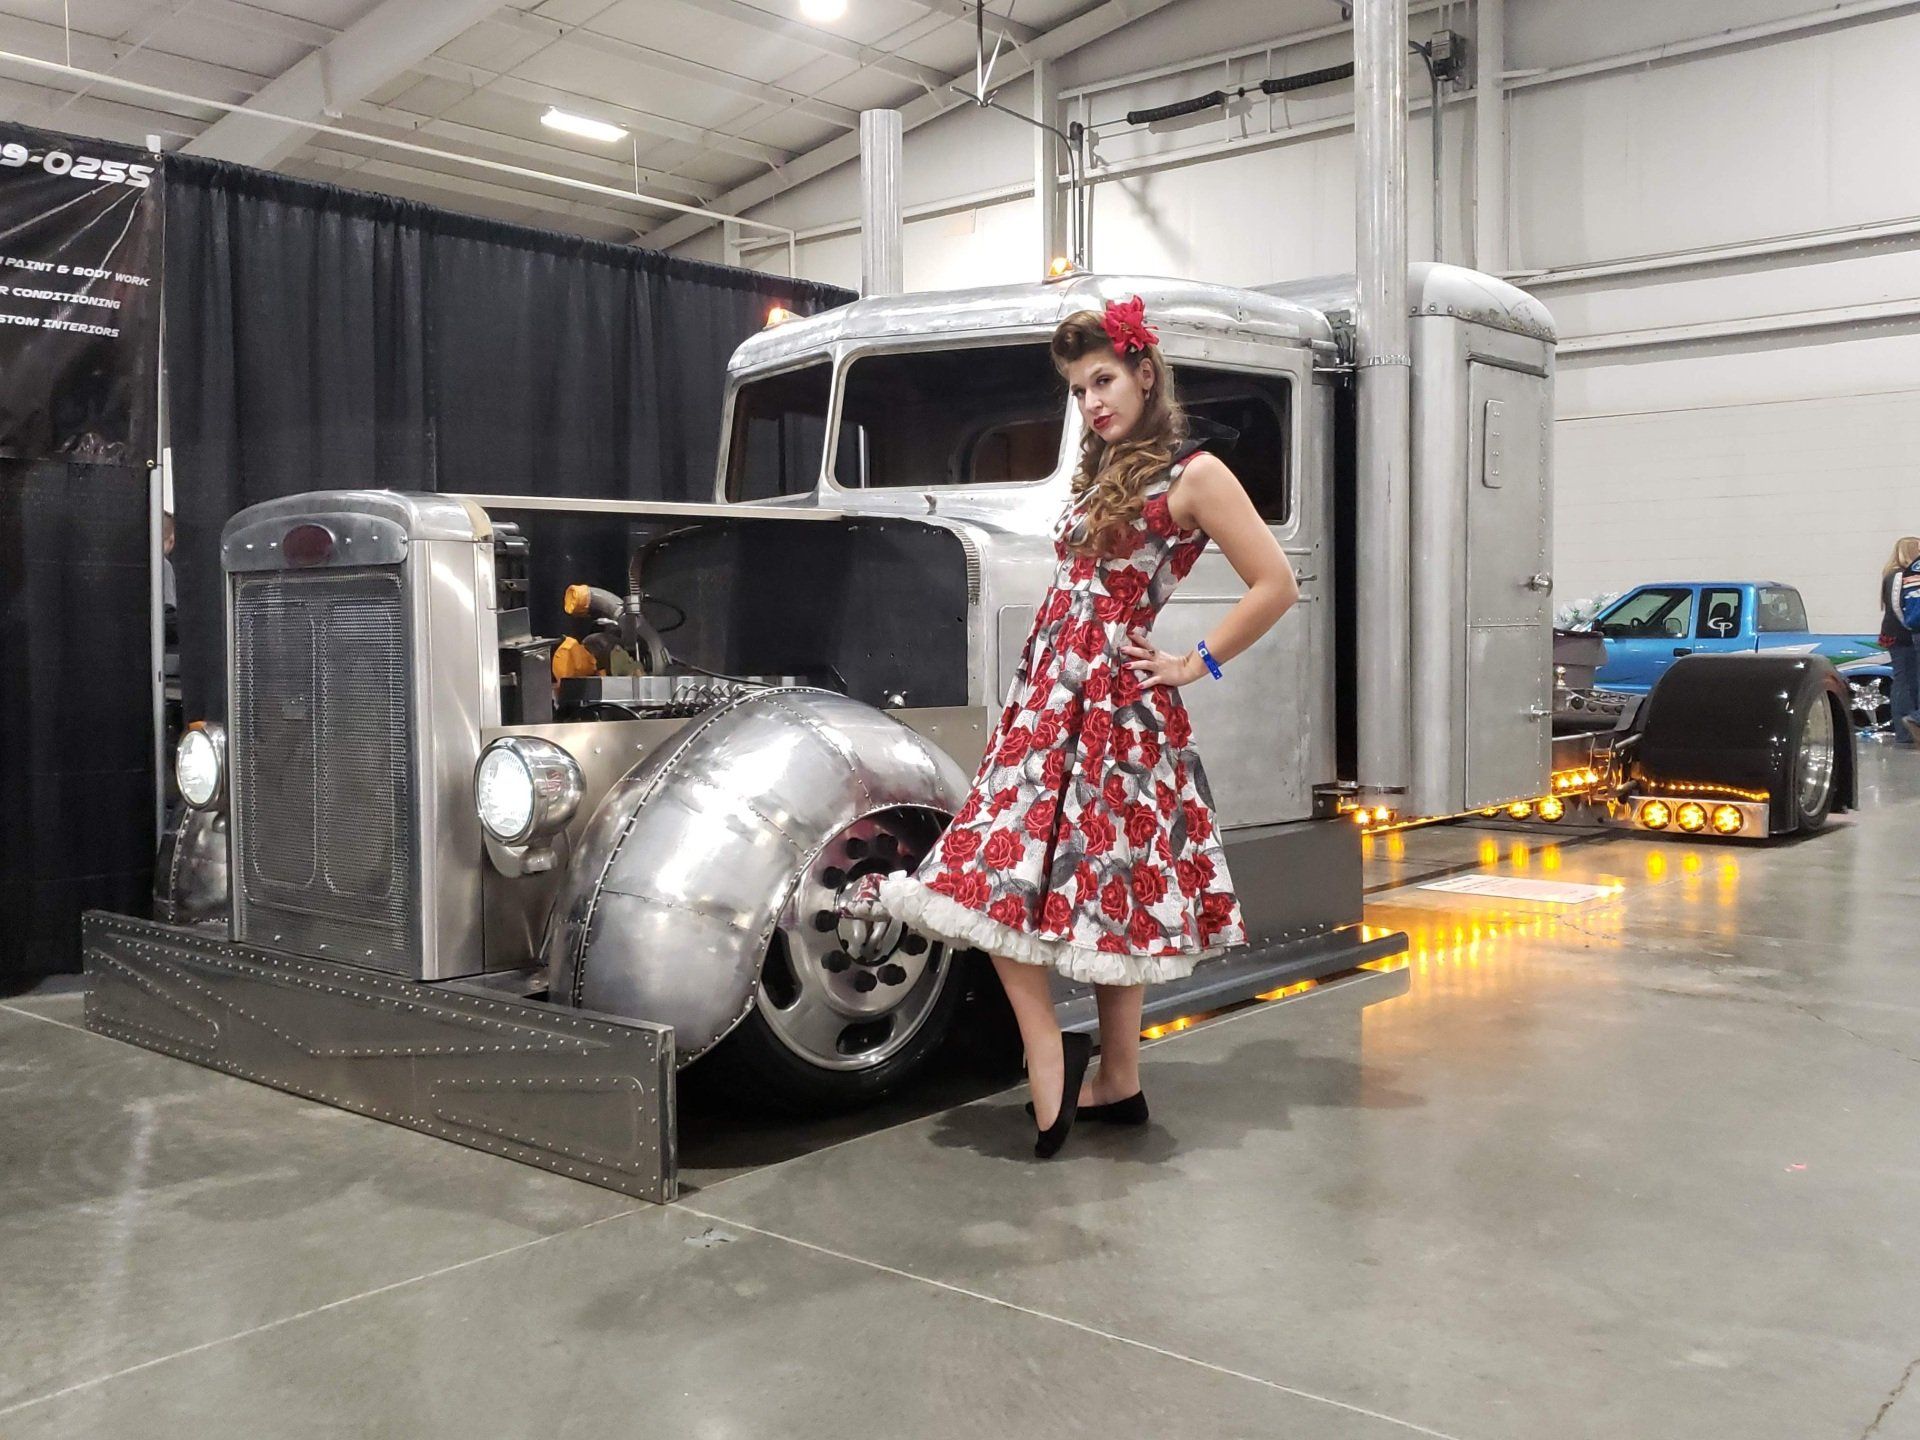 A woman in a red dress is standing next to an old truck.